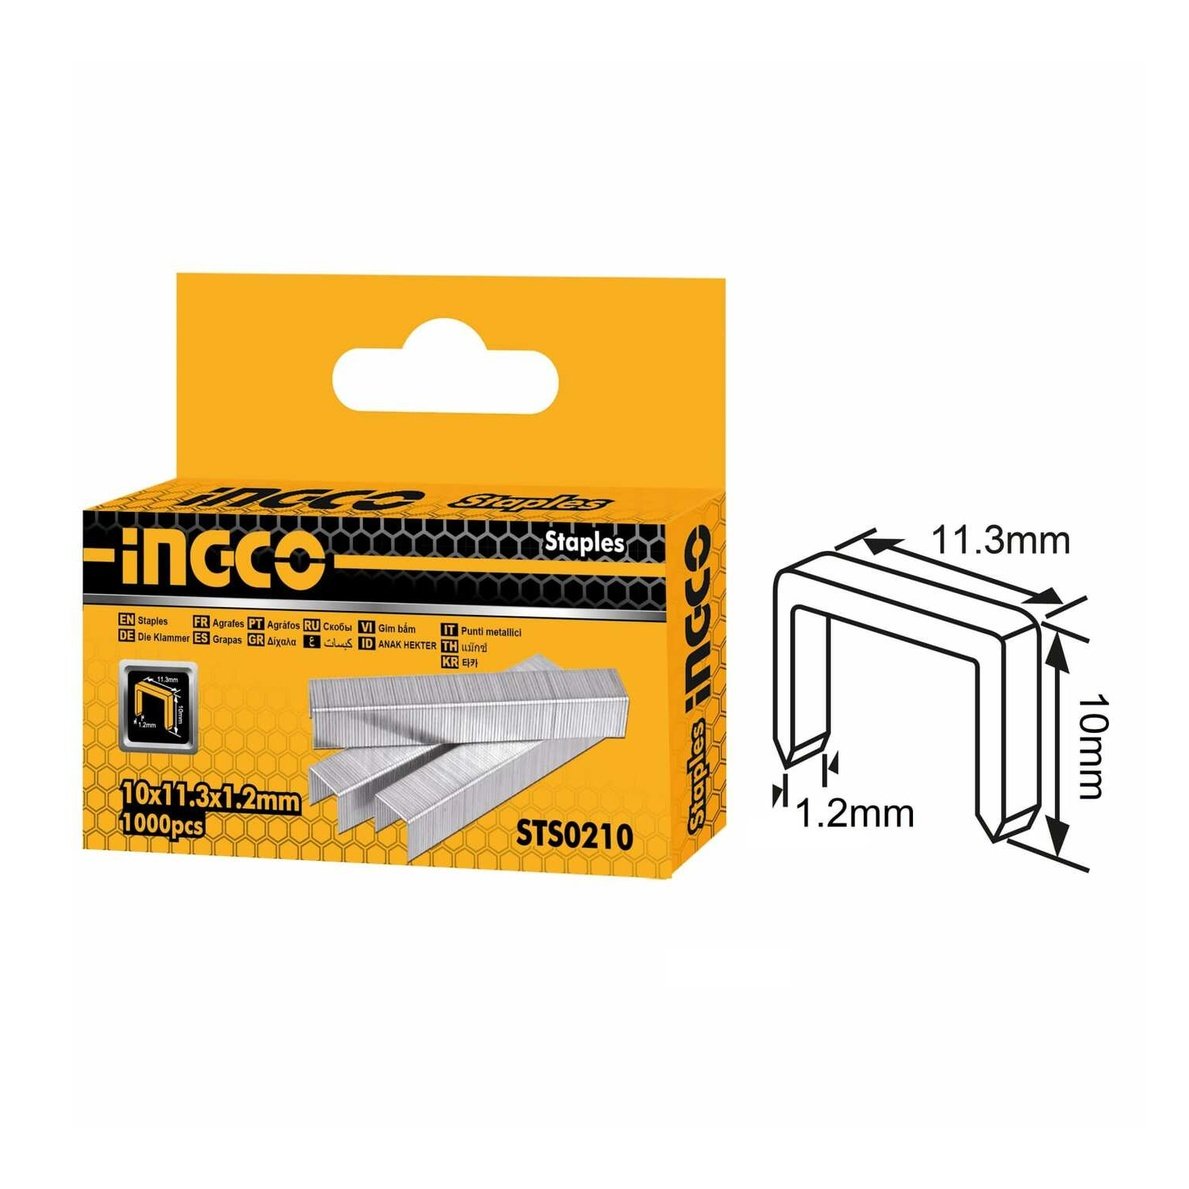 Ingco 1000 Pieces Staples Size 10x11.3x1.2mm  - STS0210 | Supply Master | Accra, Ghana Fasteners Buy Tools hardware Building materials